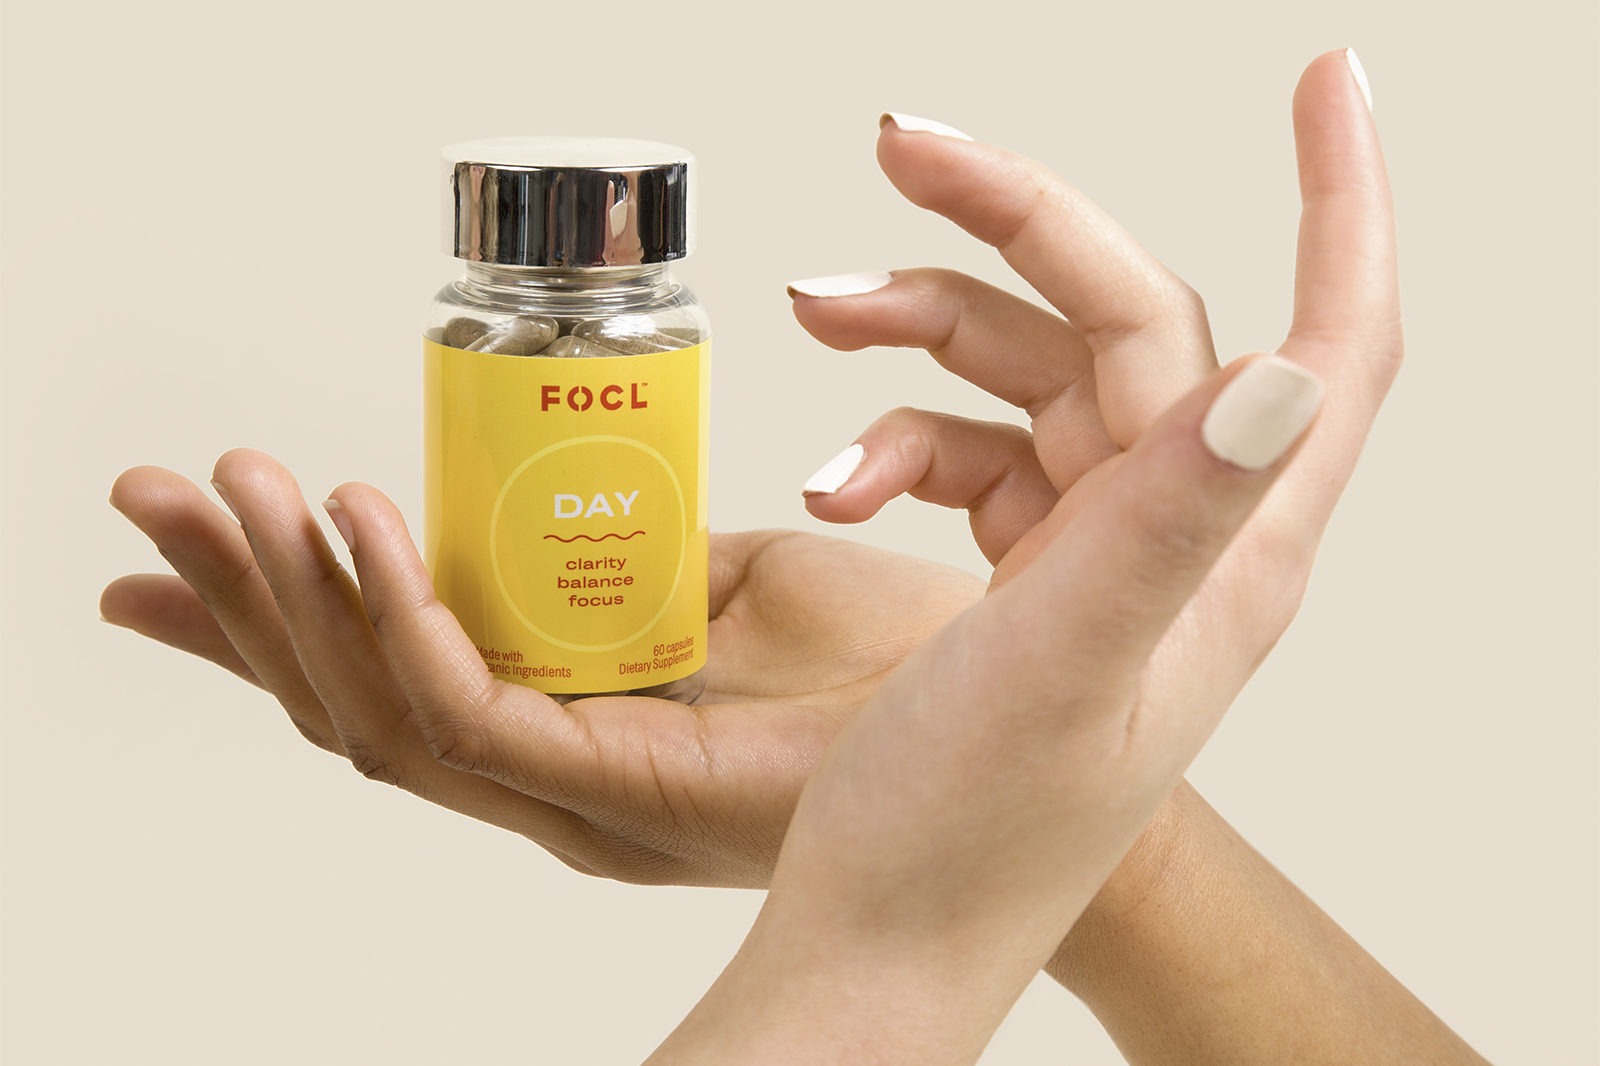 Woman's hands with a bottle of FOCL Day.